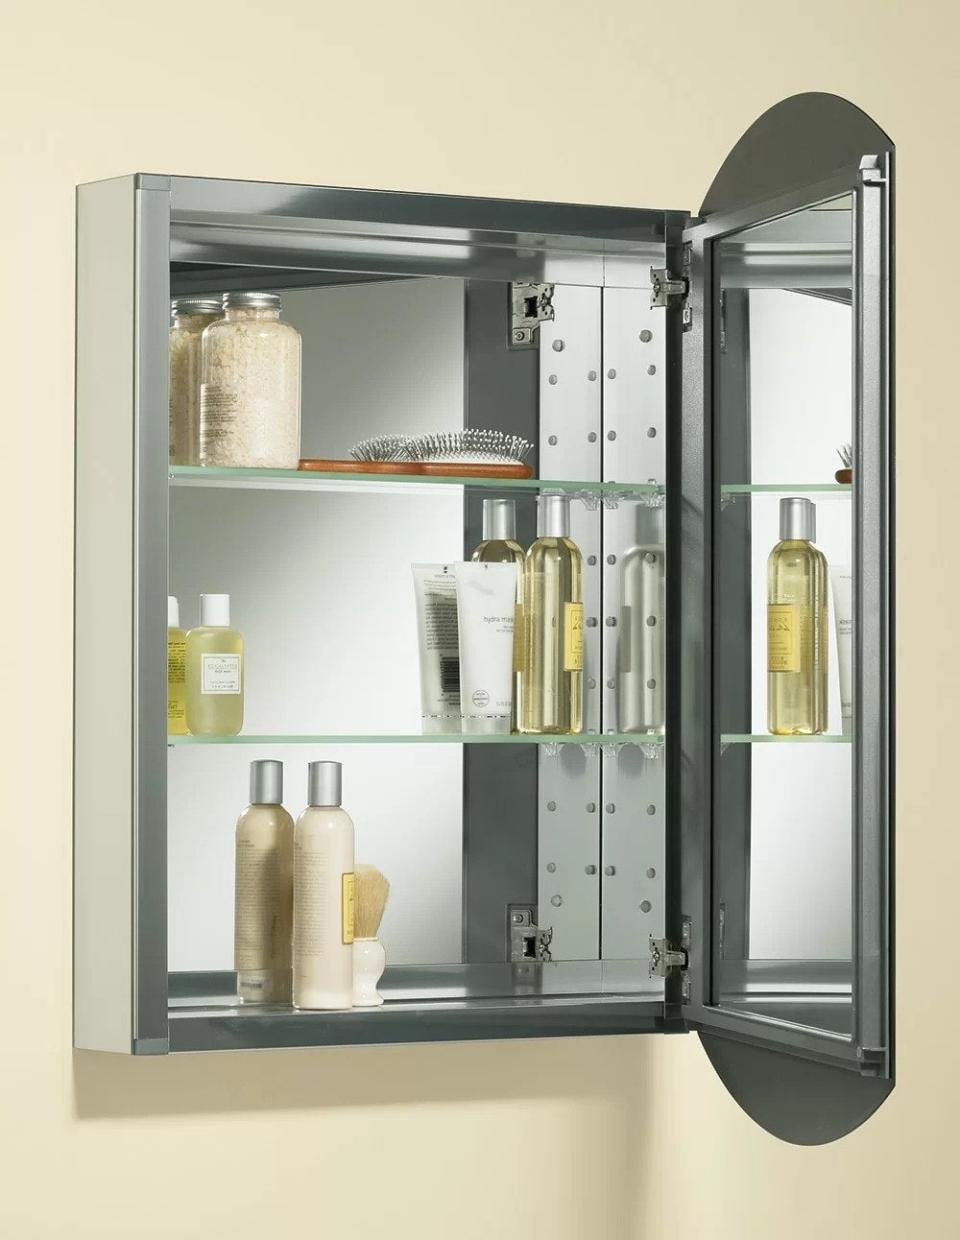 The interior of the cabinet with a mirrored surface and two shelves